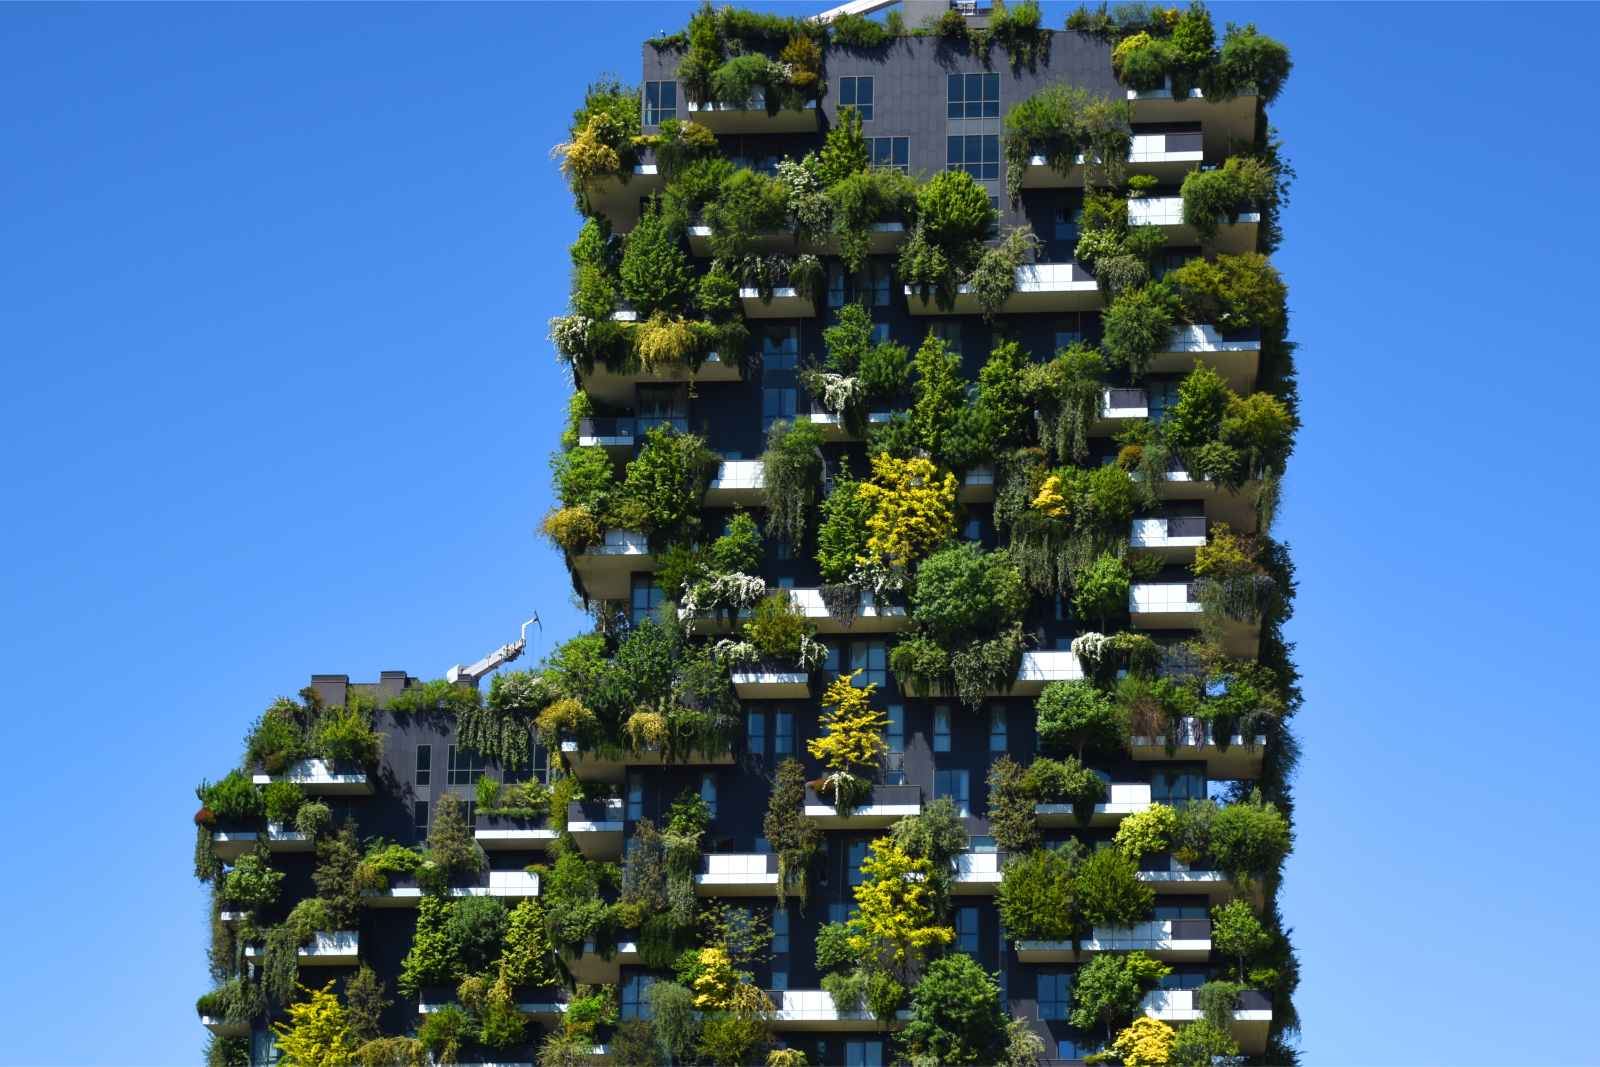 Things to do in Milan Vertical Forest